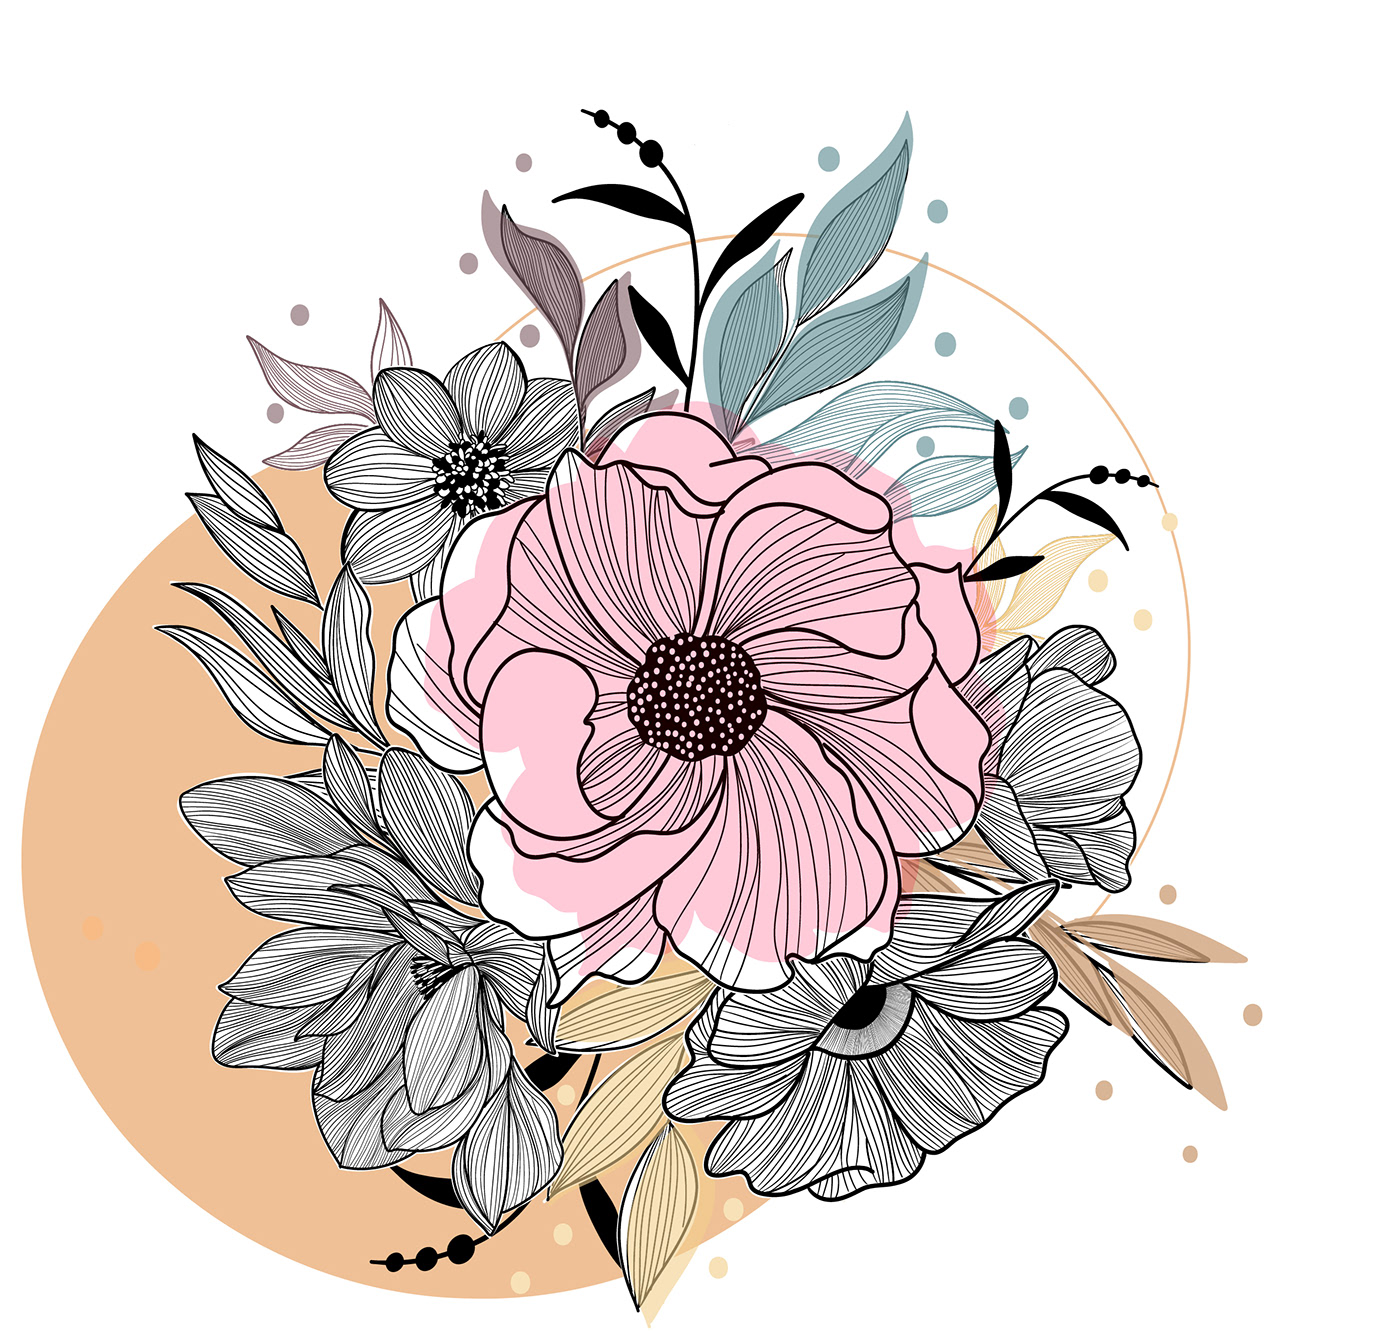 adobe fresco art black and white colors Digital Art  Drawing  floral Flowers ILLUSTRATION  lines painting  